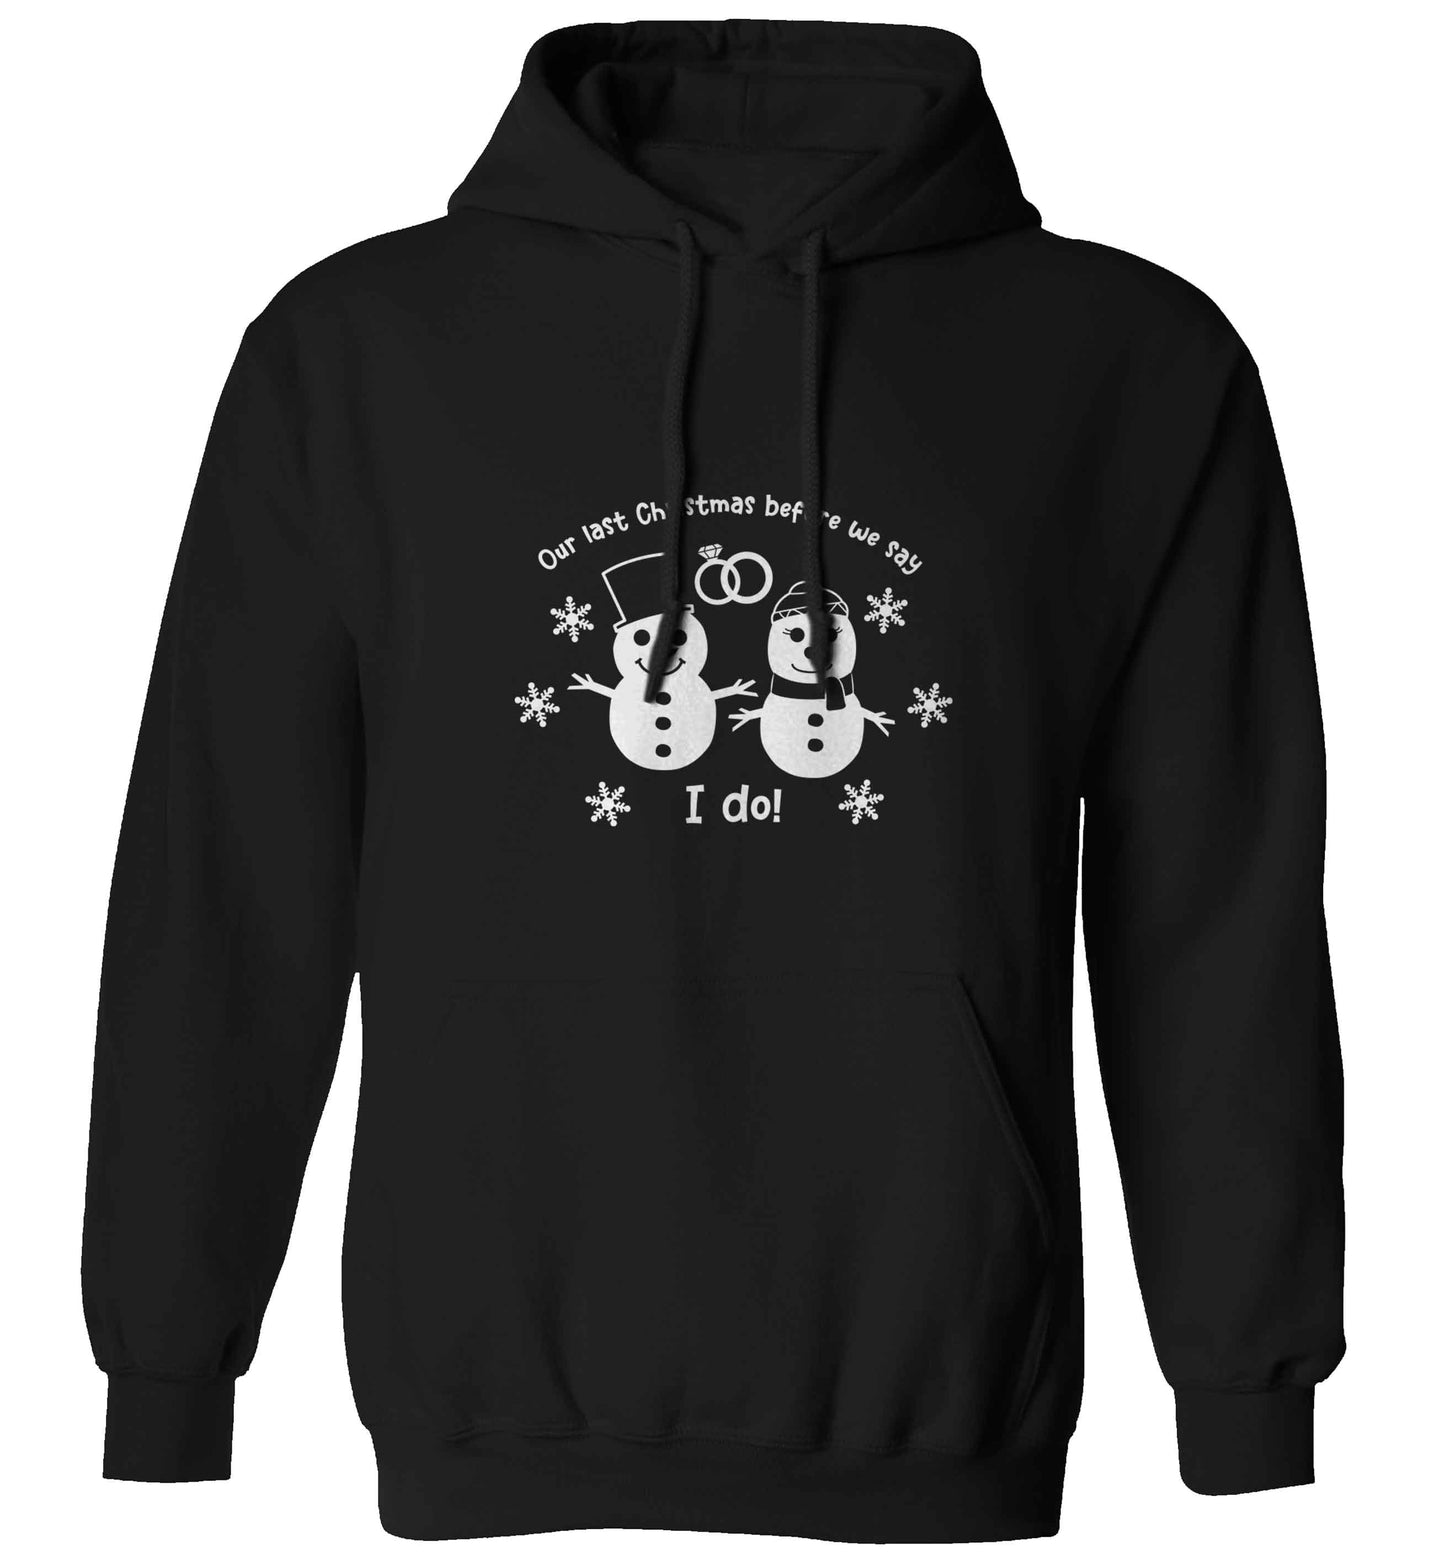 Last Christmas before we say I do adults unisex black hoodie 2XL